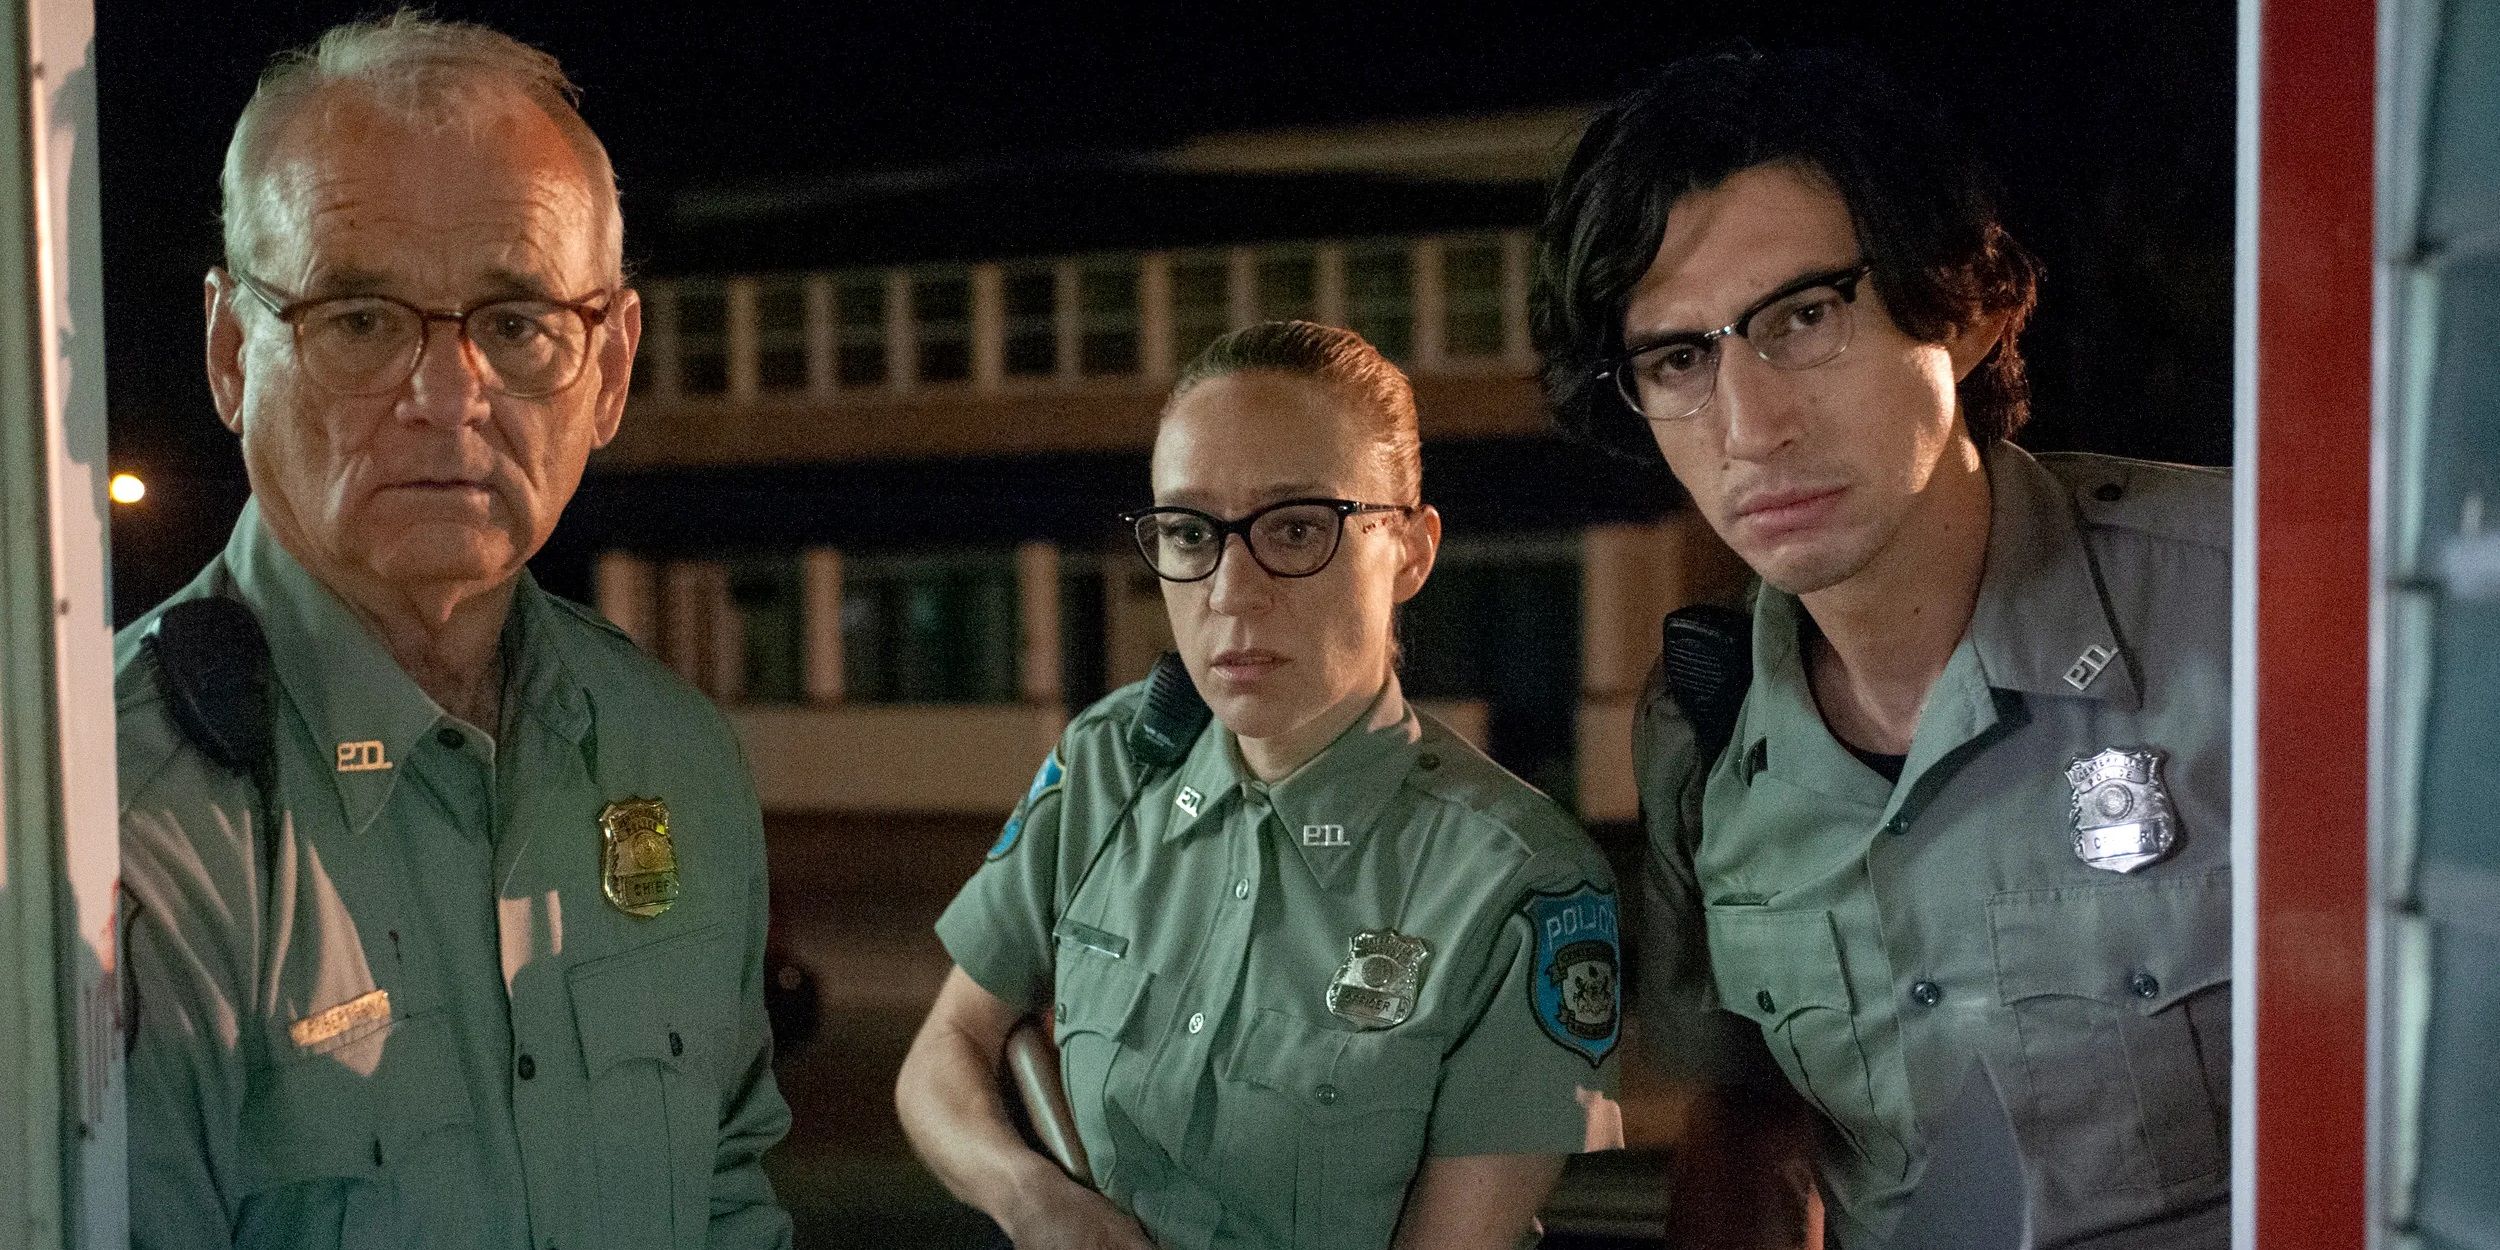 Bill Murray, Chloe Sevigny, and Adam Driver as cops in The Dead Don't Die